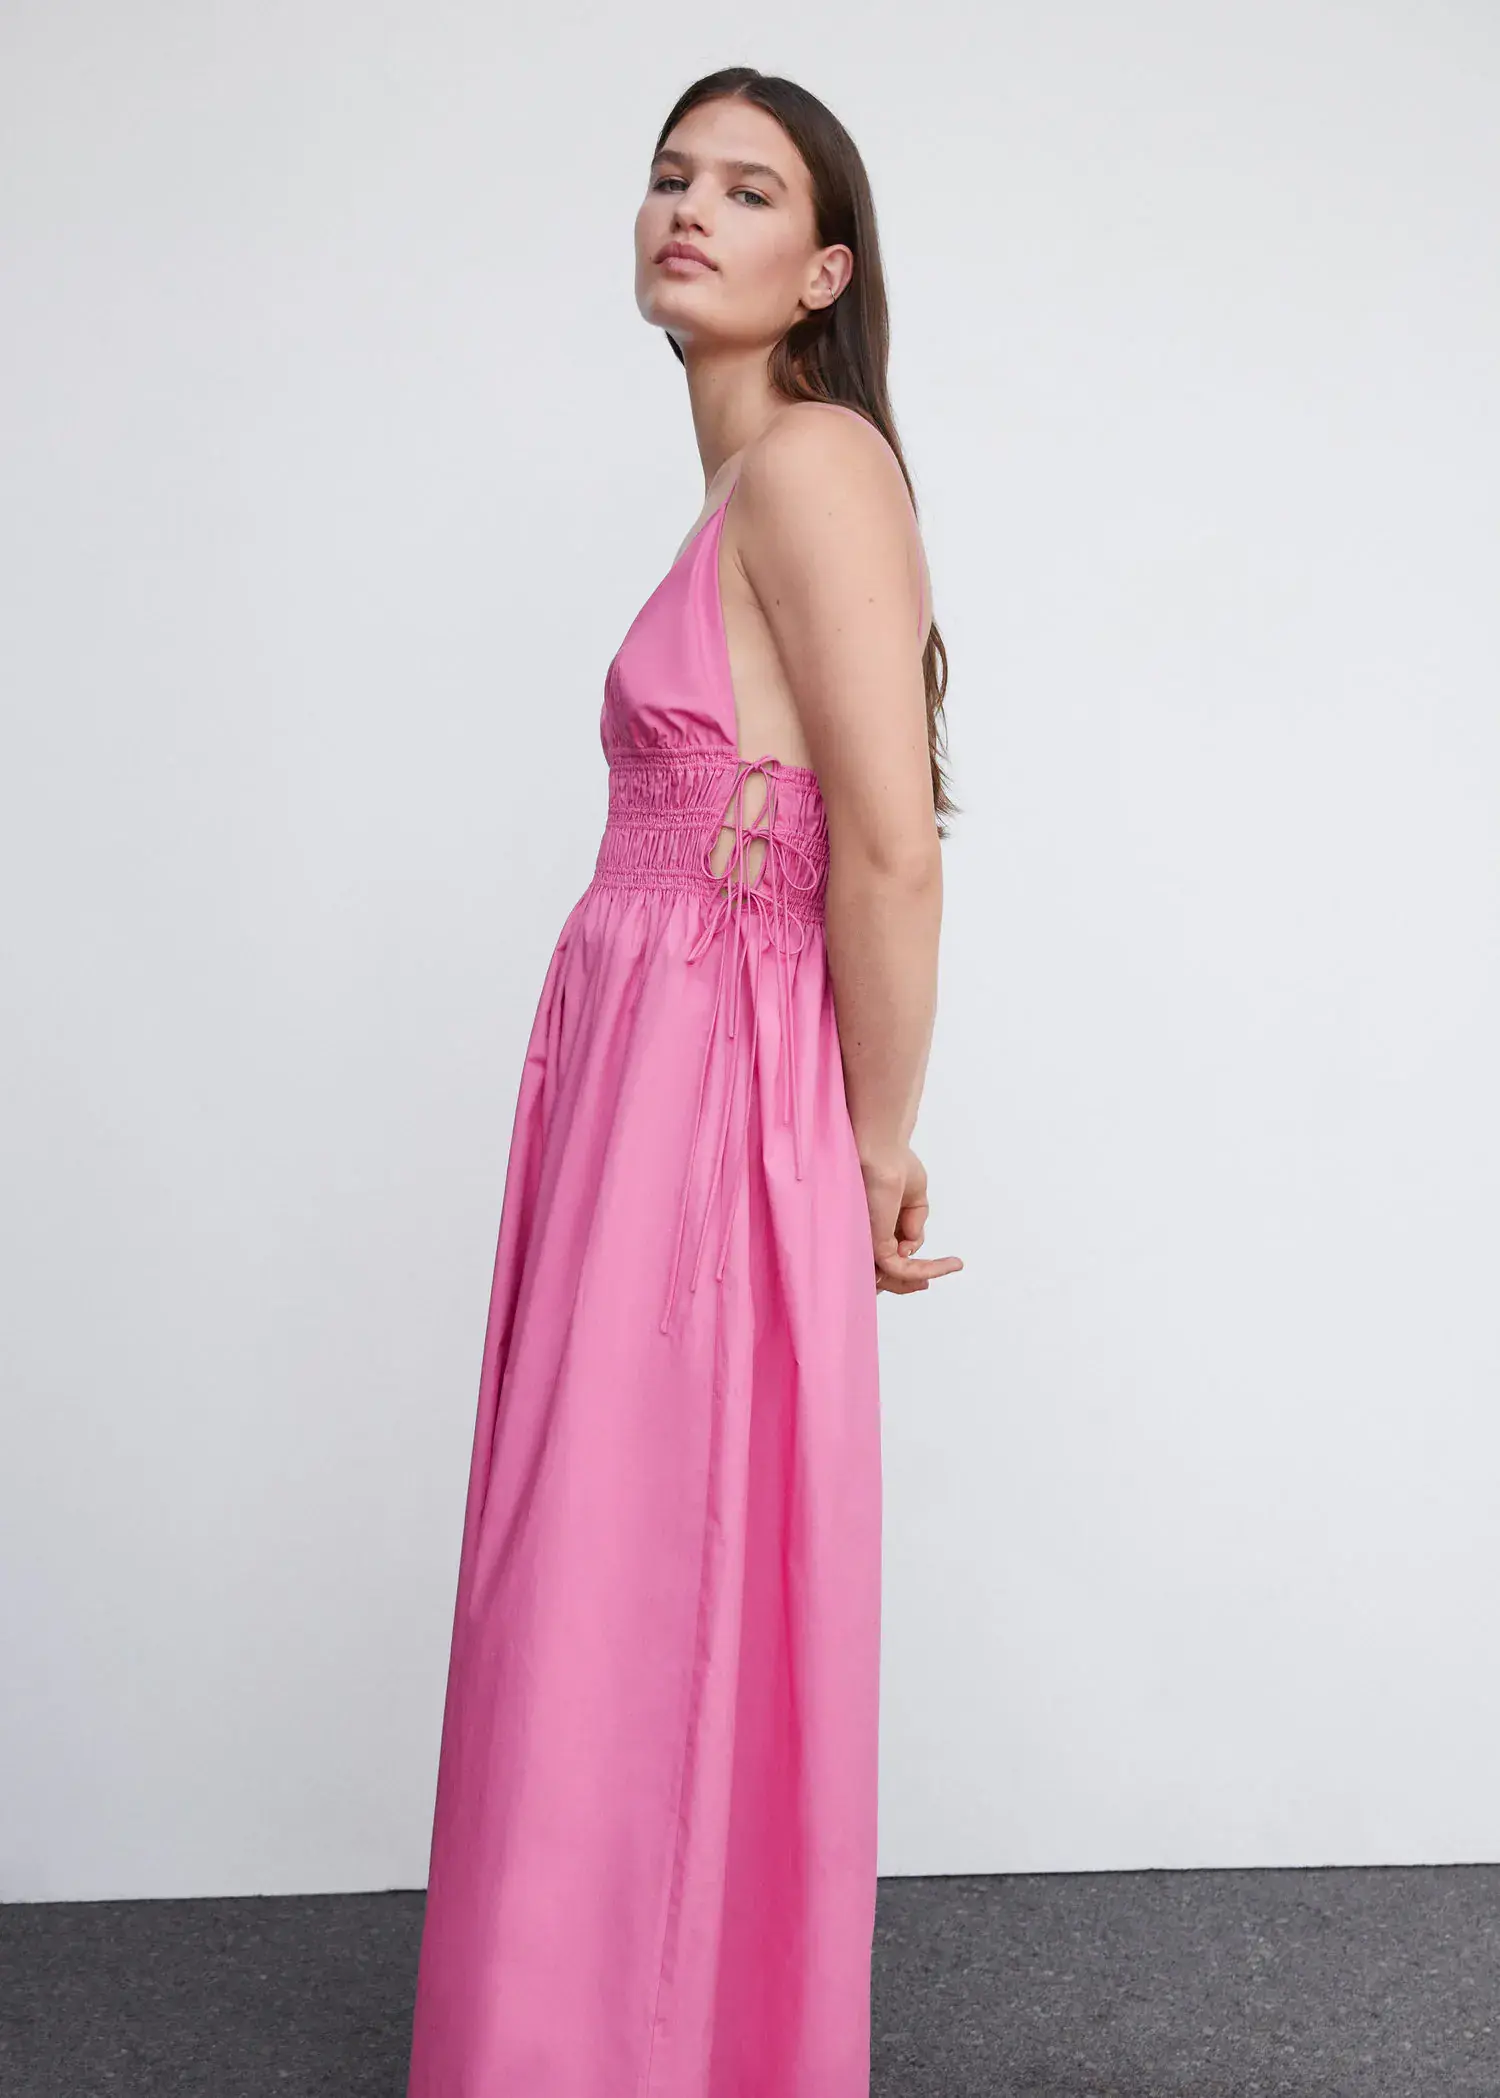 Mango Cotton dress with side ties. a woman wearing a pink dress standing next to a white wall. 